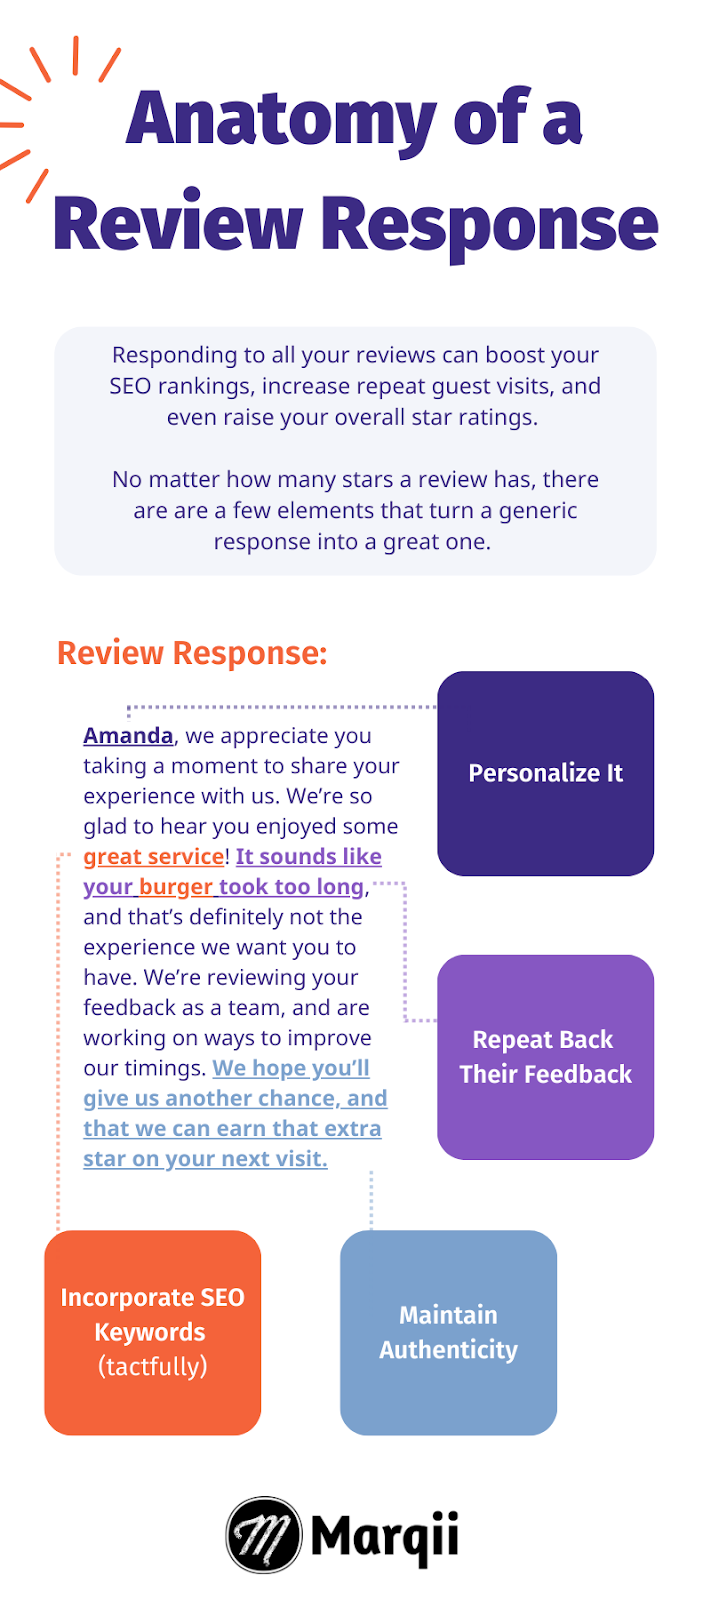 Guidelines for a good review response